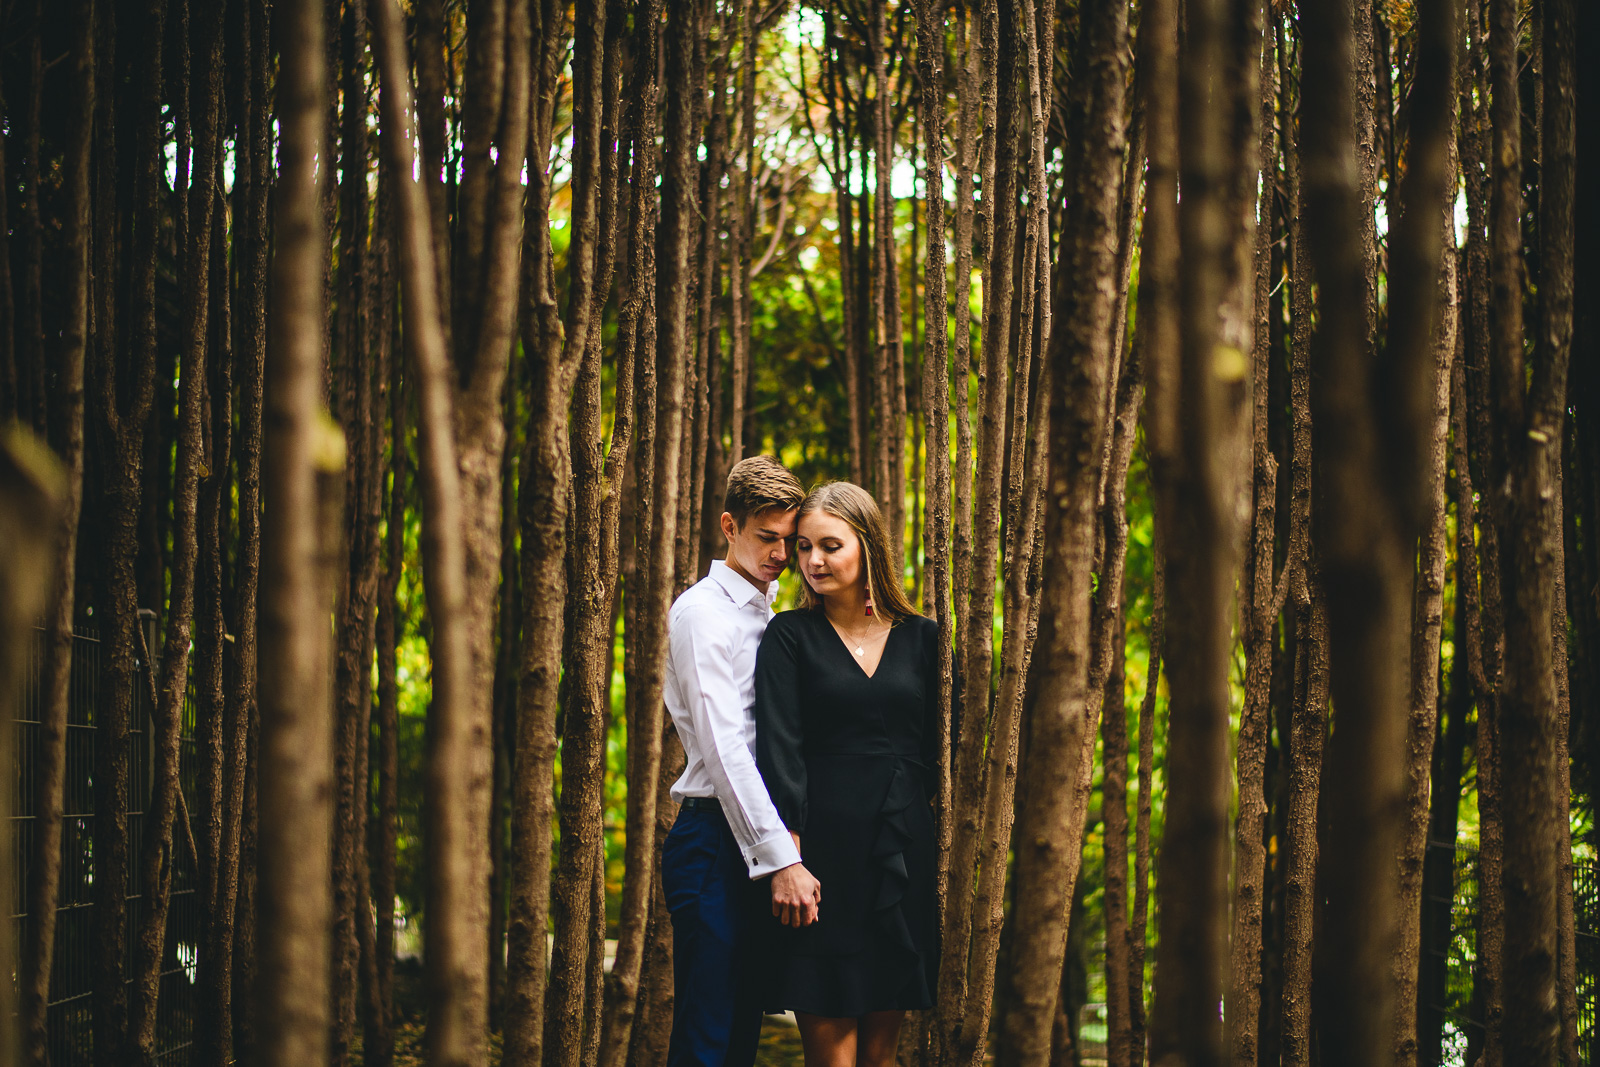 amazing engagement photos in chicago - Chicago Fall Engagement Photos // Marta + Kevin